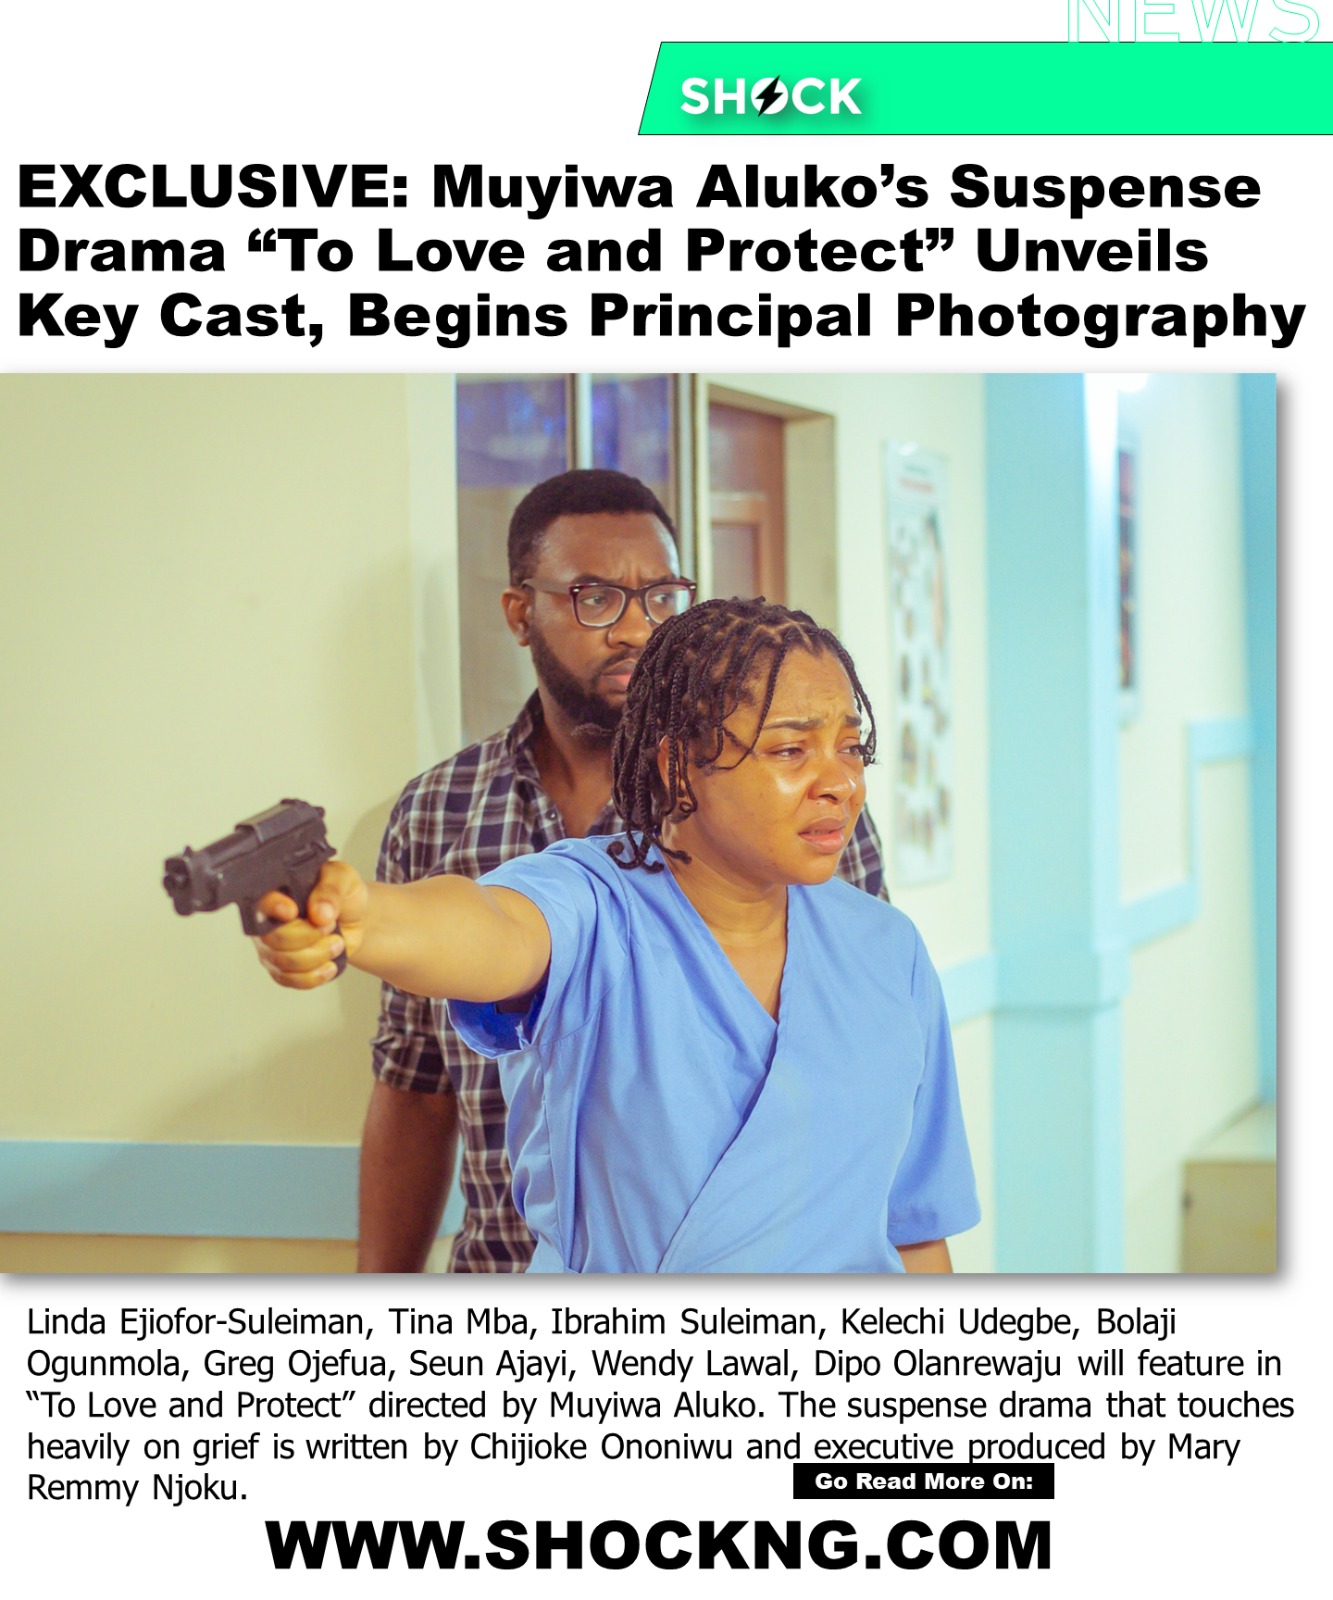 To Love and Protect by Muyiwa Aluko - Muyiwa Aluko’s “To Love and Protect” Unveils Key Cast, Begins Principal Photography (EXCLUSIVE)